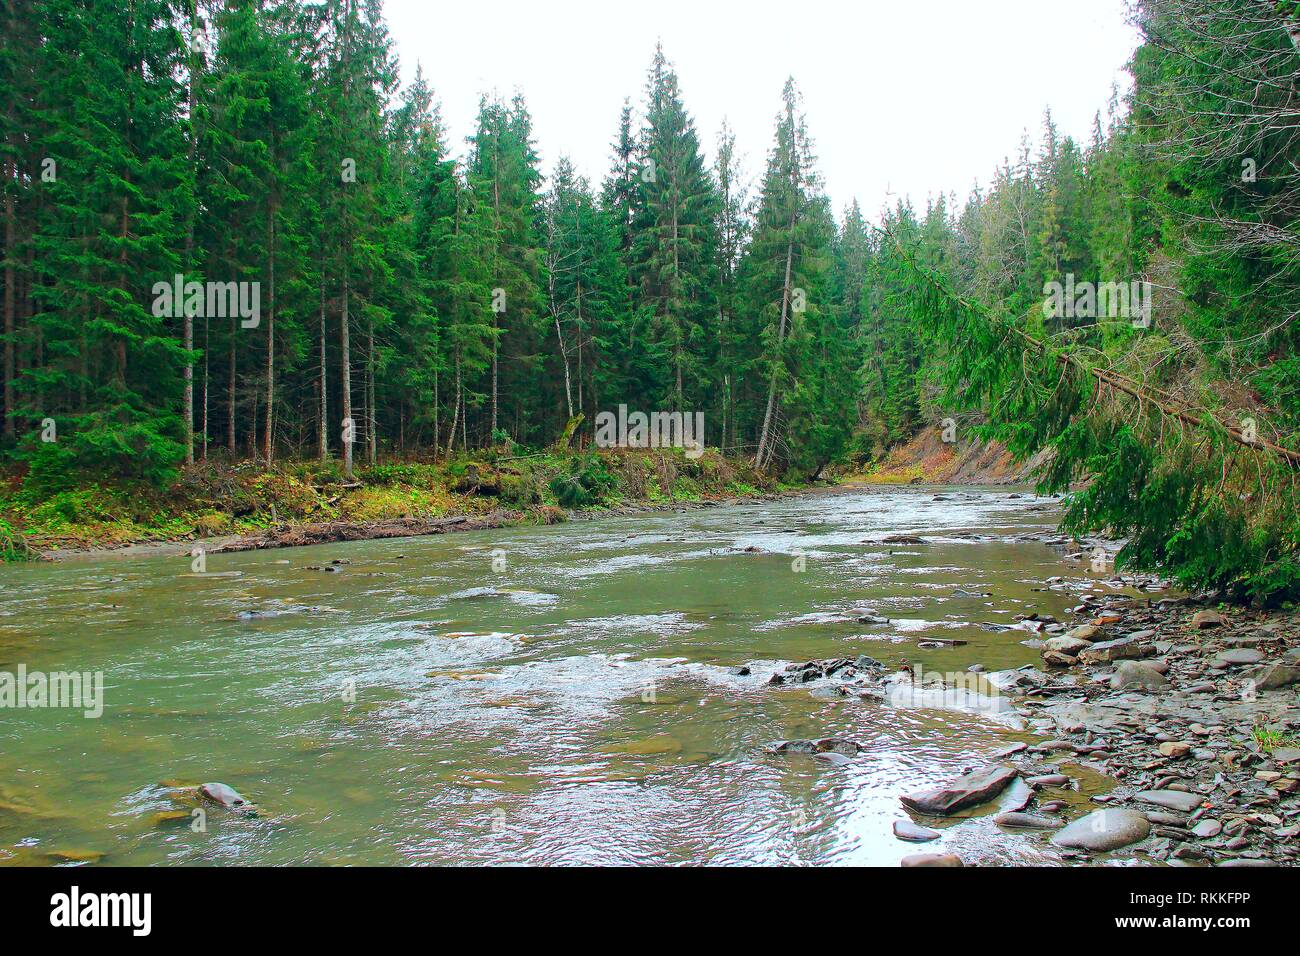 Fast mountain river flowing through forest. Narrow mountain river flowing in mountainous area in forest. Beautiful scenery with stream of fast water. Stock Photo